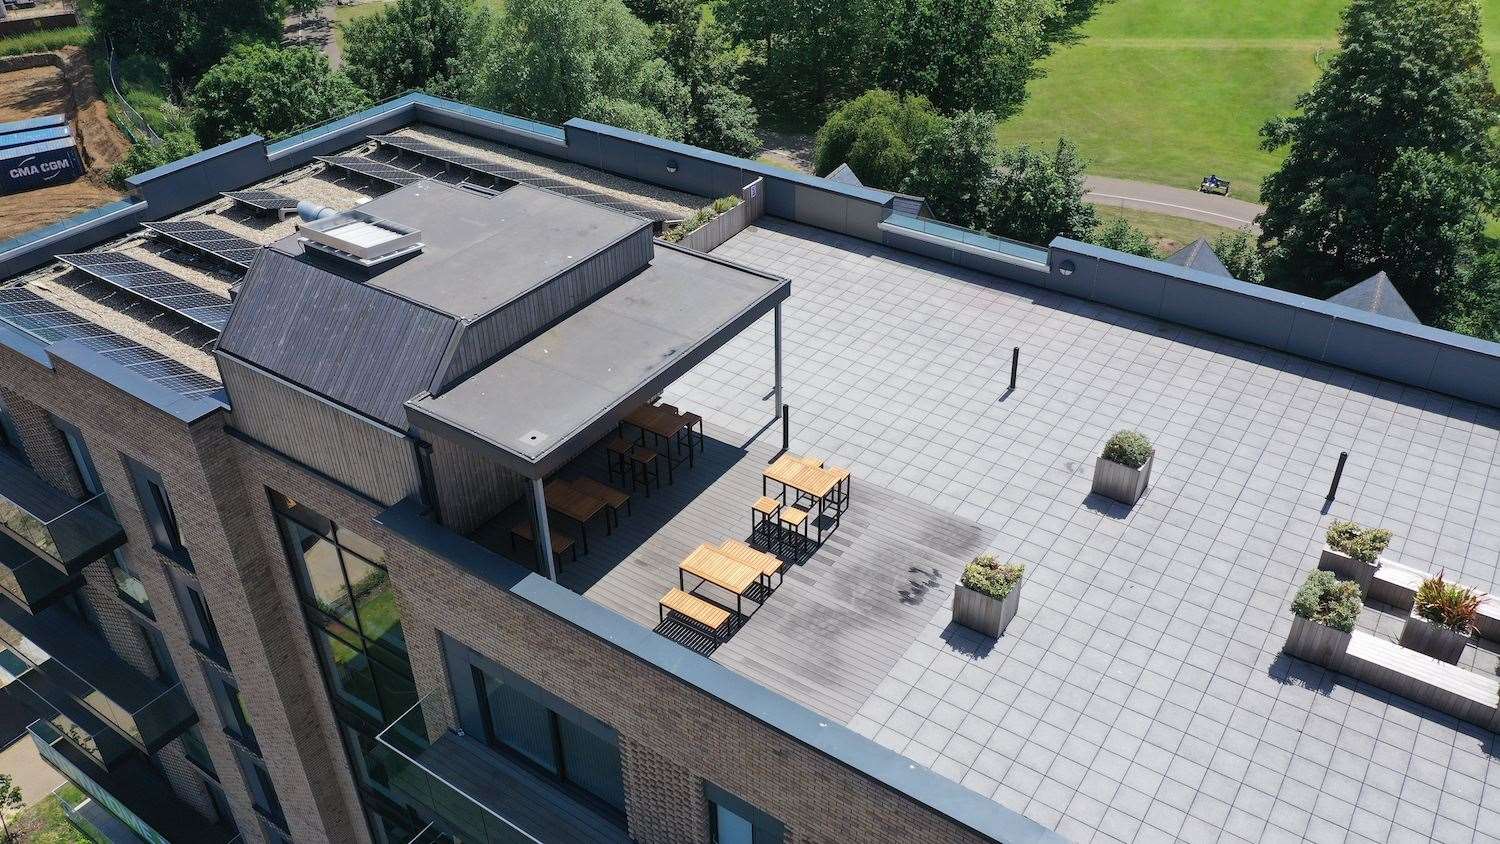 New photos of Riverside Park in Ashford have been revealed, including the rooftop terrace. Photos: GRE Assets